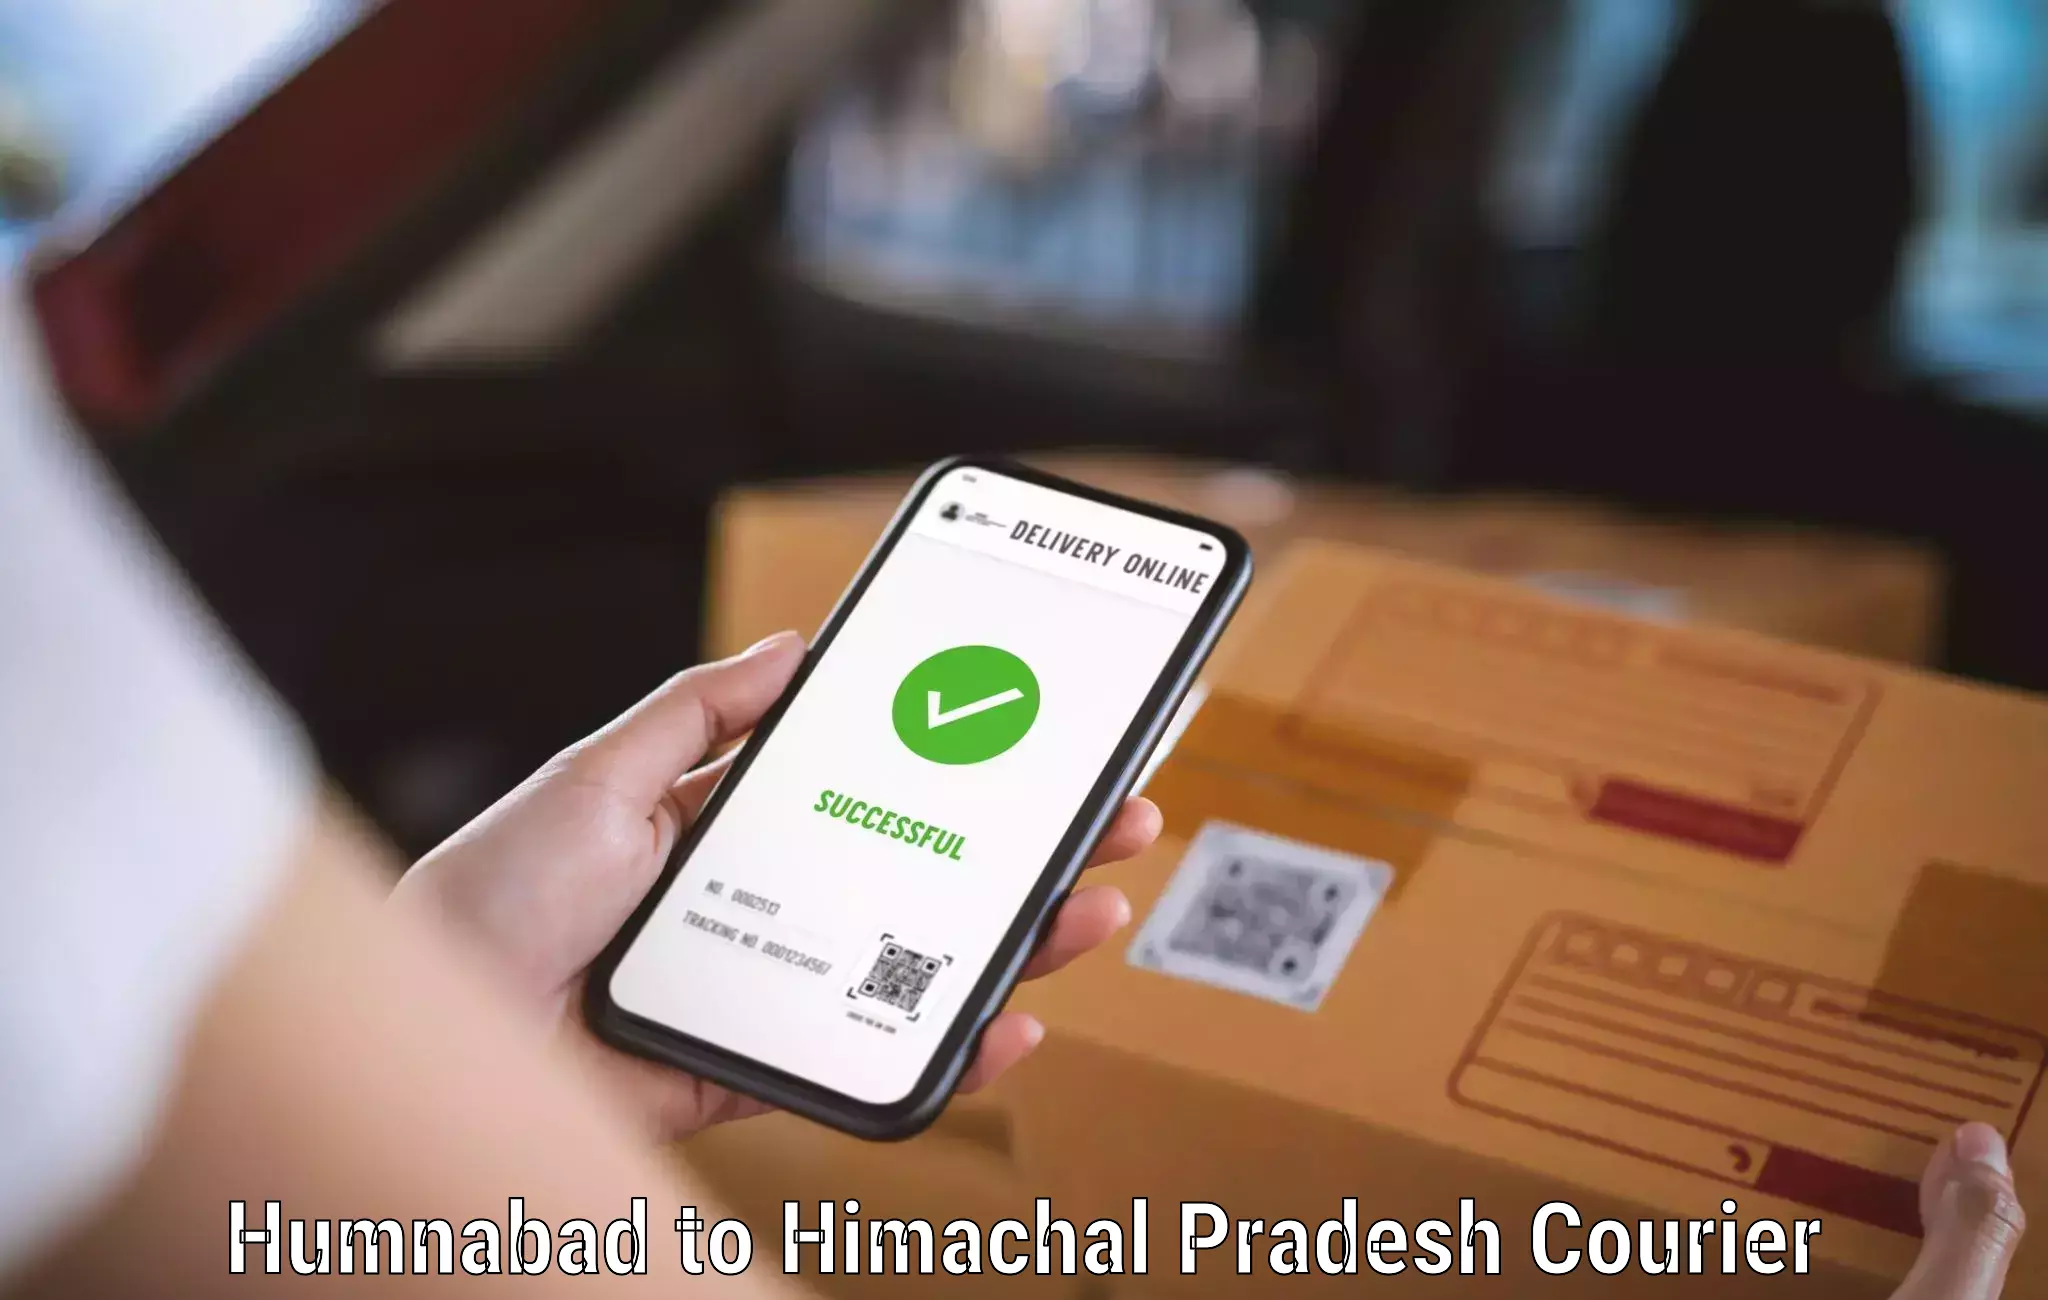 Courier service comparison Humnabad to Dharampur Kasauli